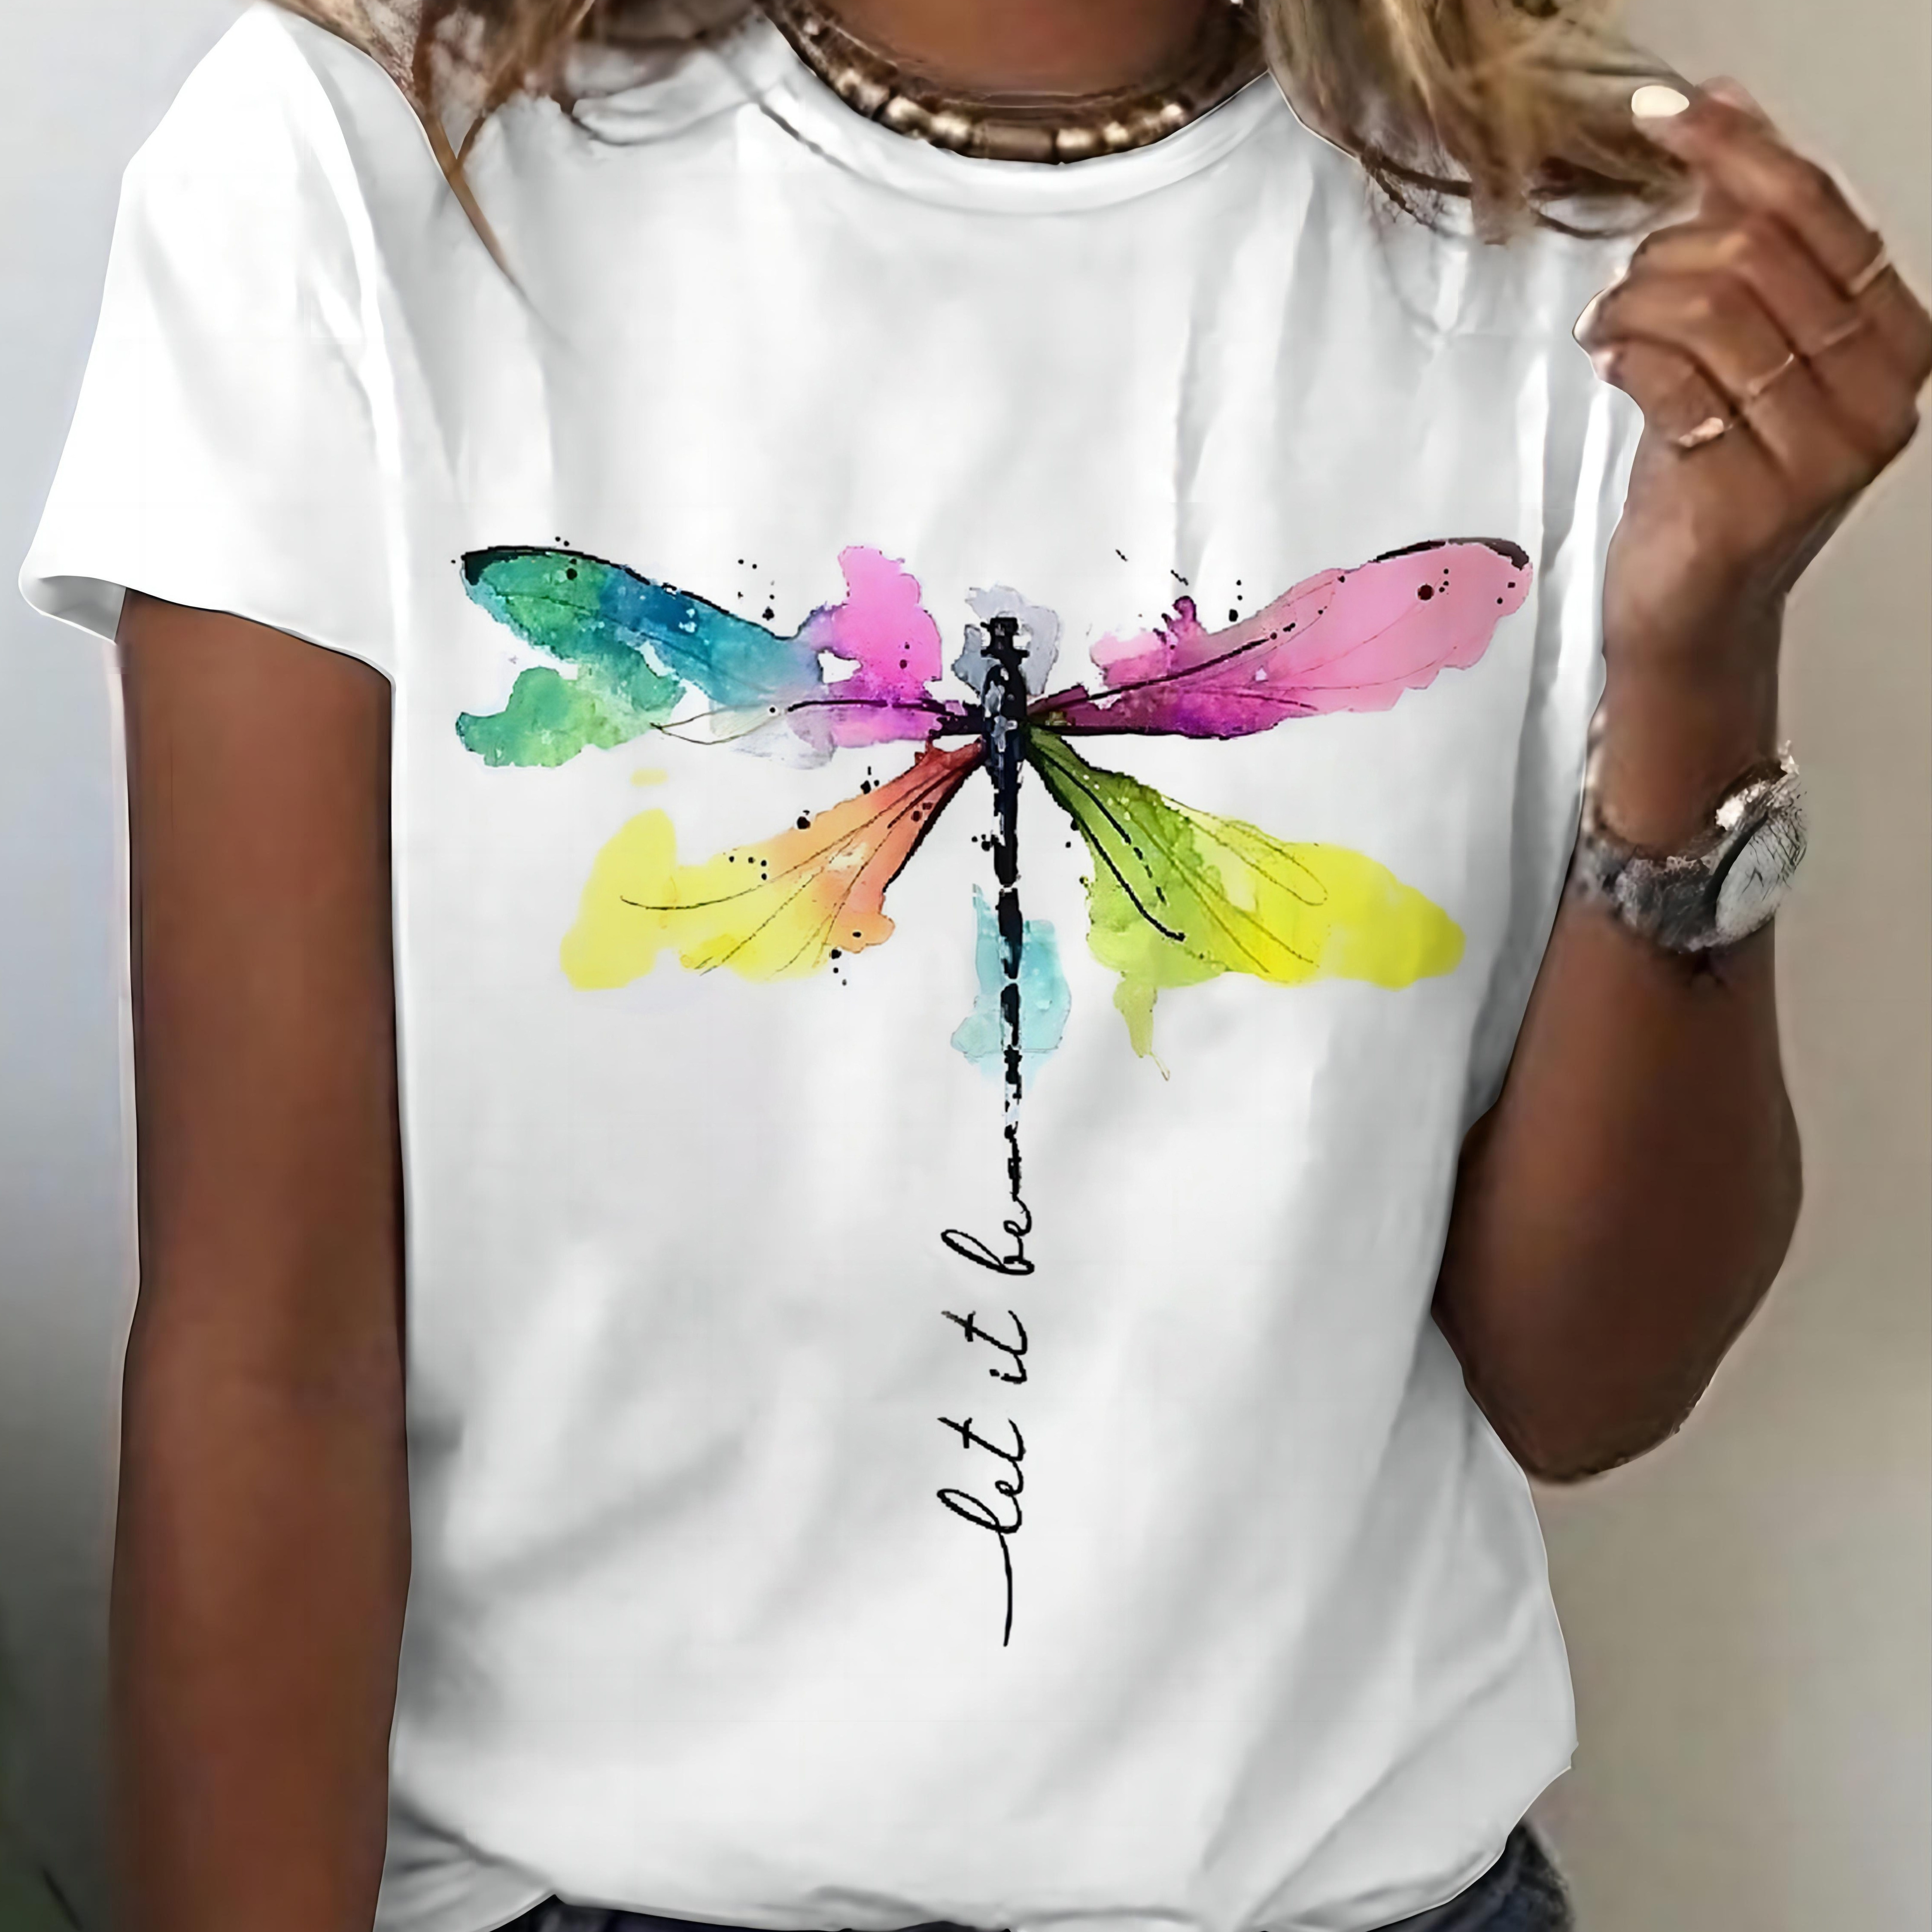 

Women's Fashion Casual White Tee, Dragonfly Art With Inspirational Quote, Short-sleeved Round Neck T-shirt, Summer Style Top